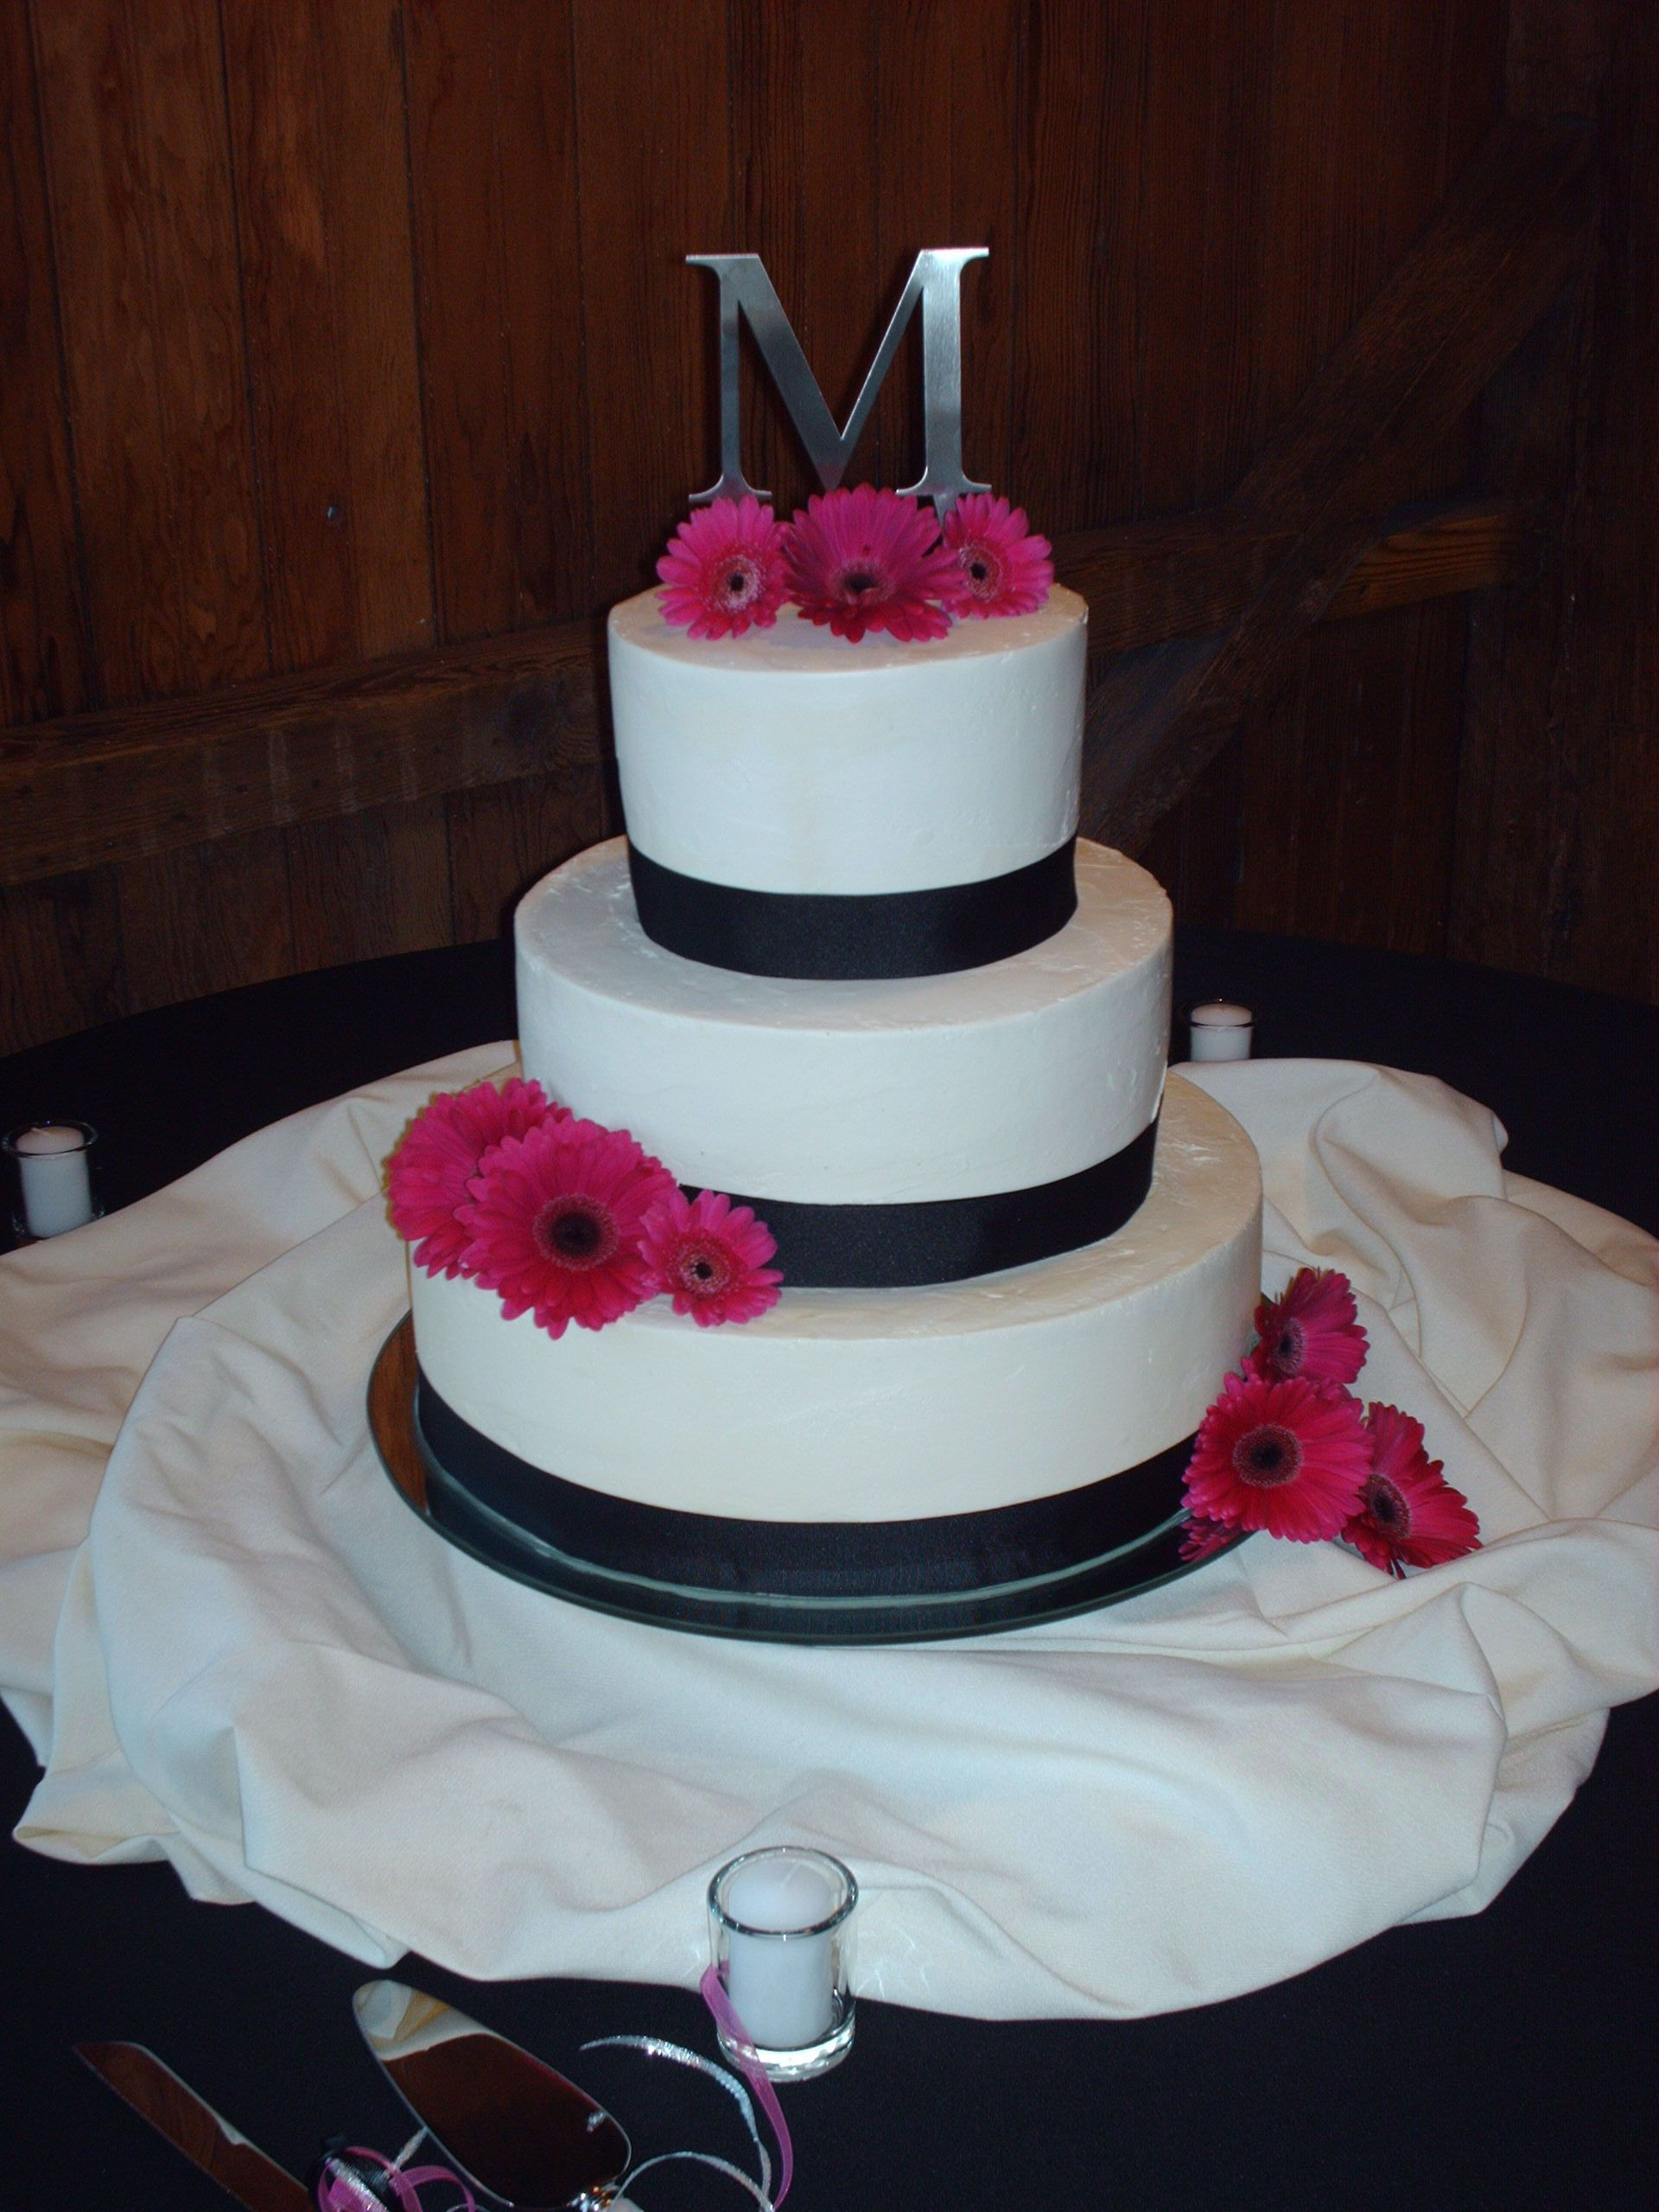 Hot Pink Wedding Cakes
 Black and Hot Pink Wedding Cake Wedding ideas for